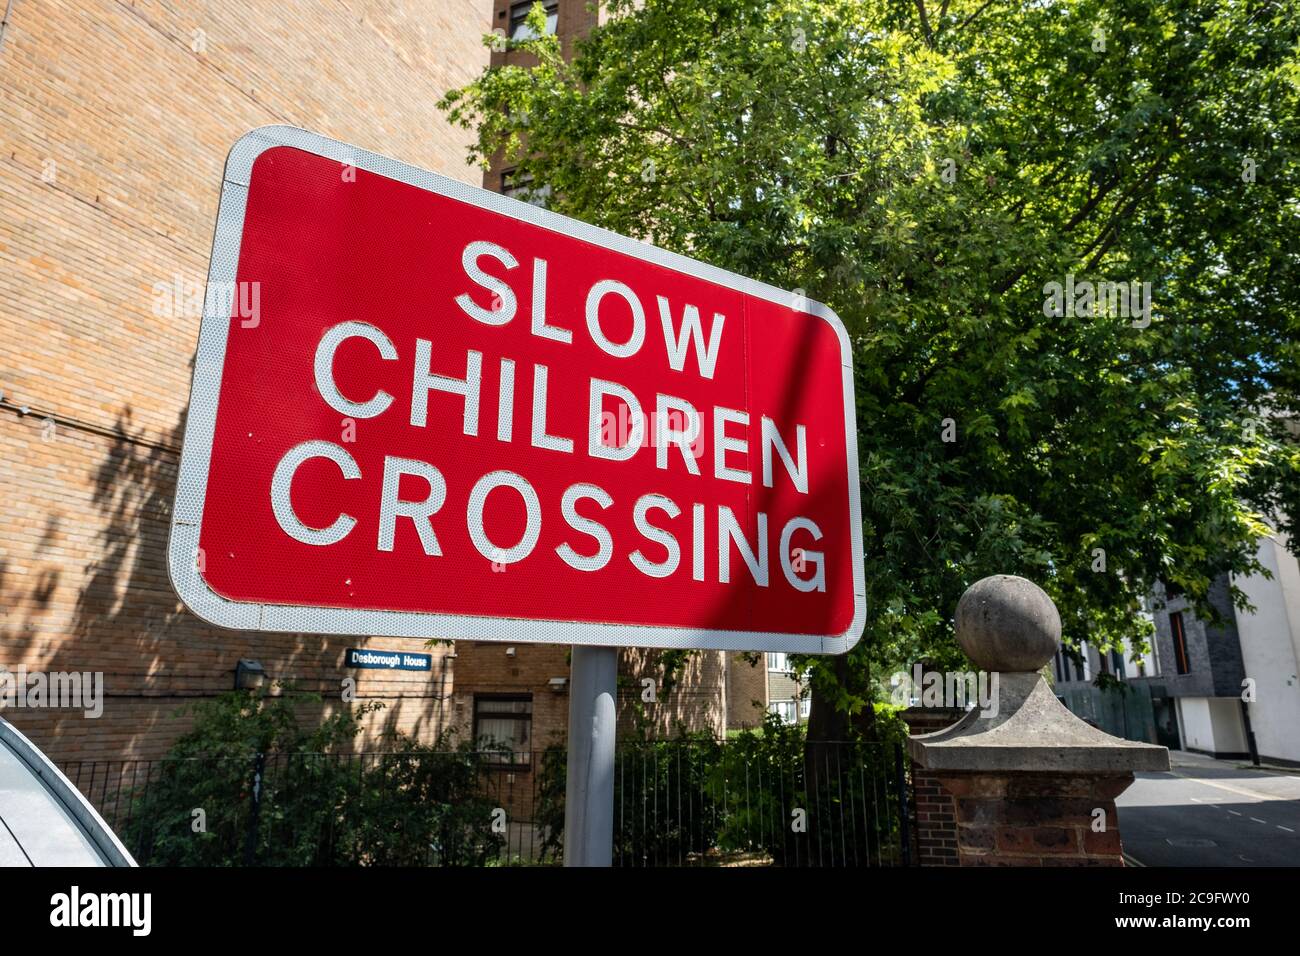 Children crossing road sign isolated Stock Photo - Alamy